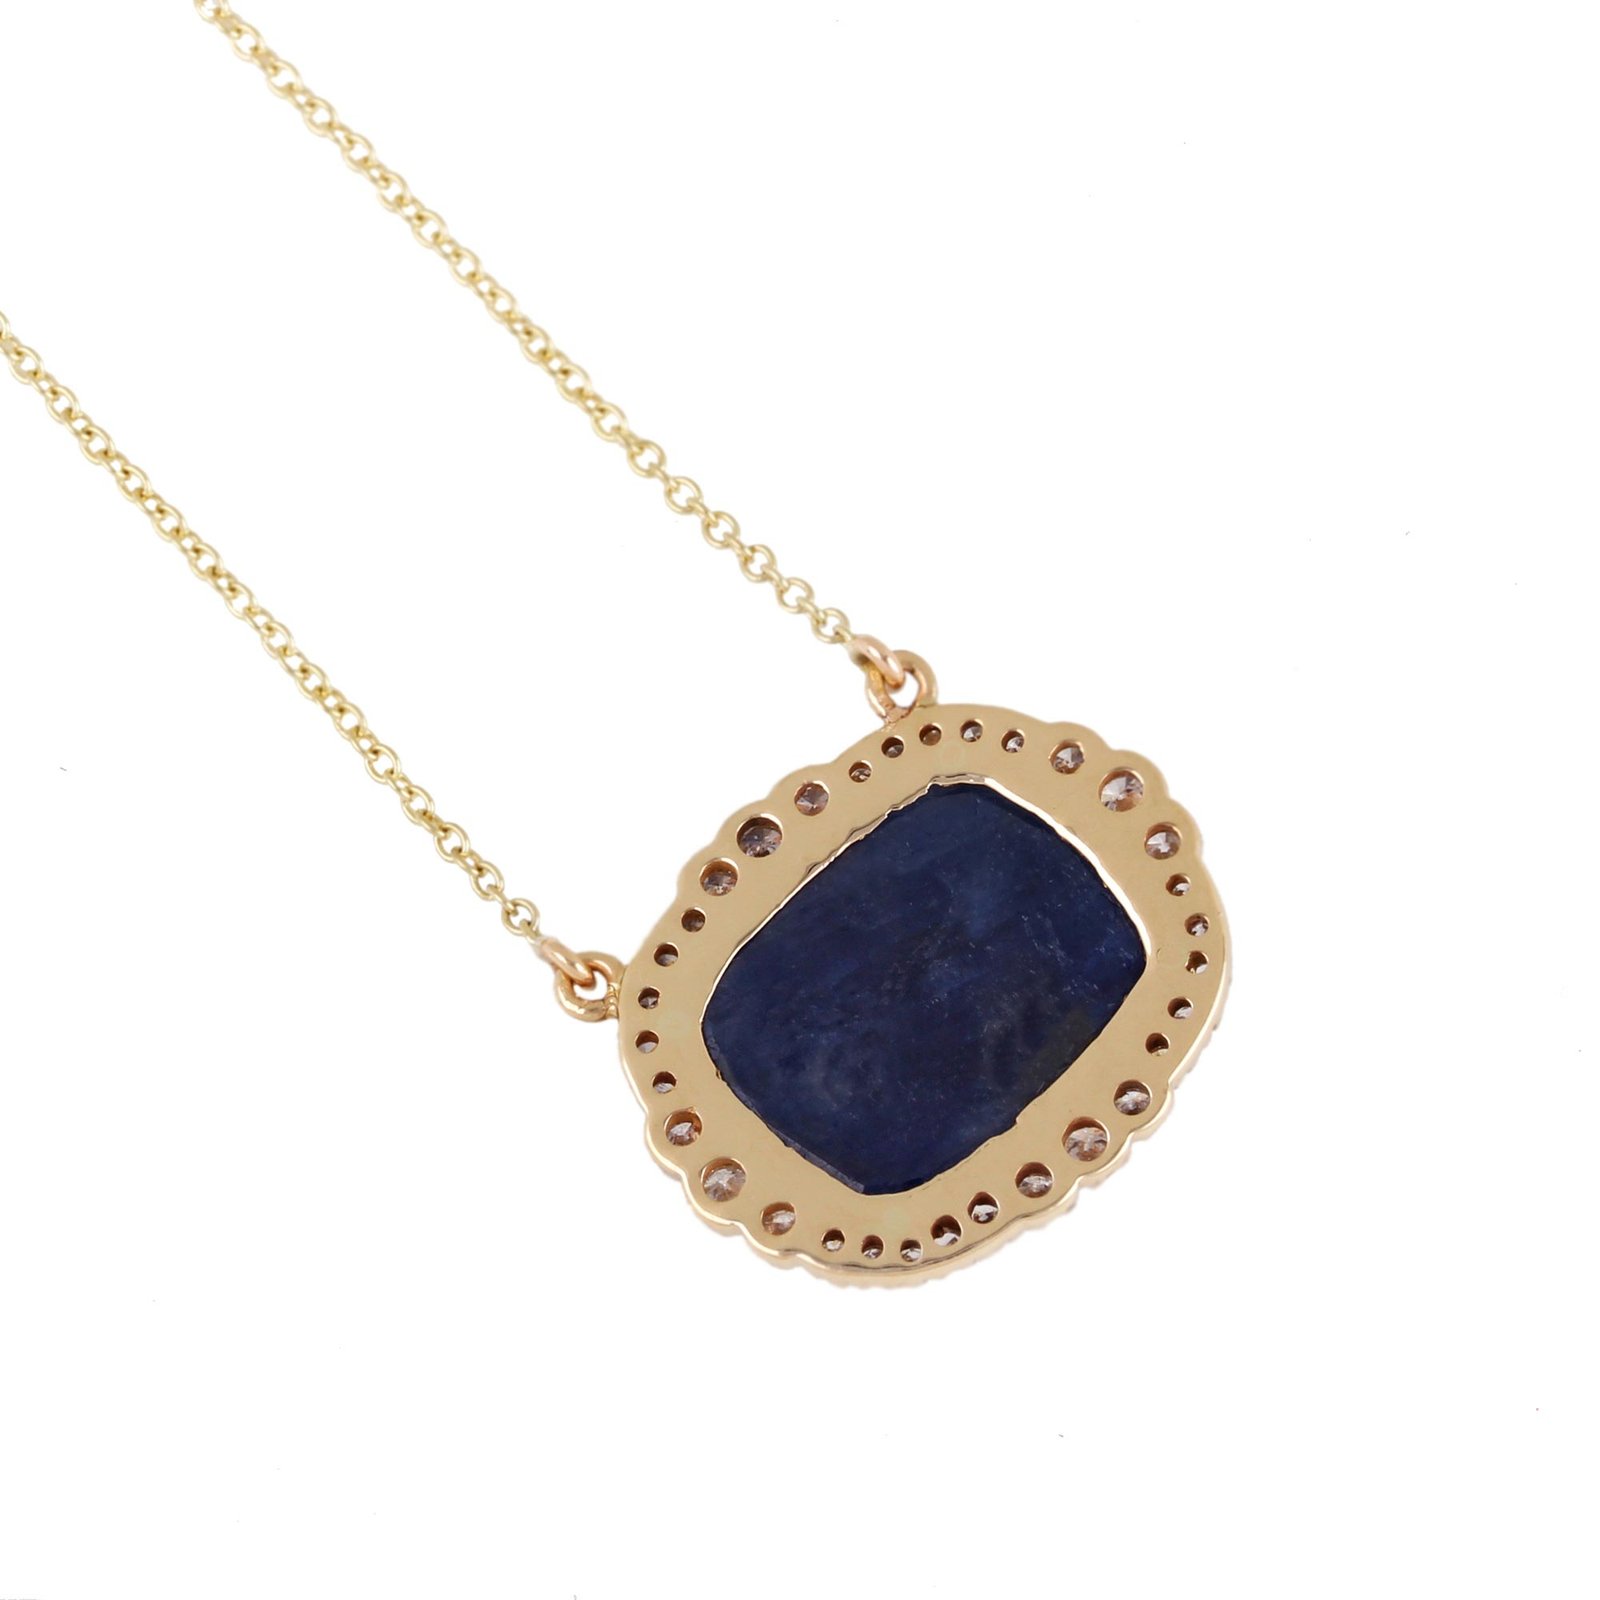 Blue Sapphire Pave Diamond Pendant Chain Necklace 14K Solid Gold Jewelry